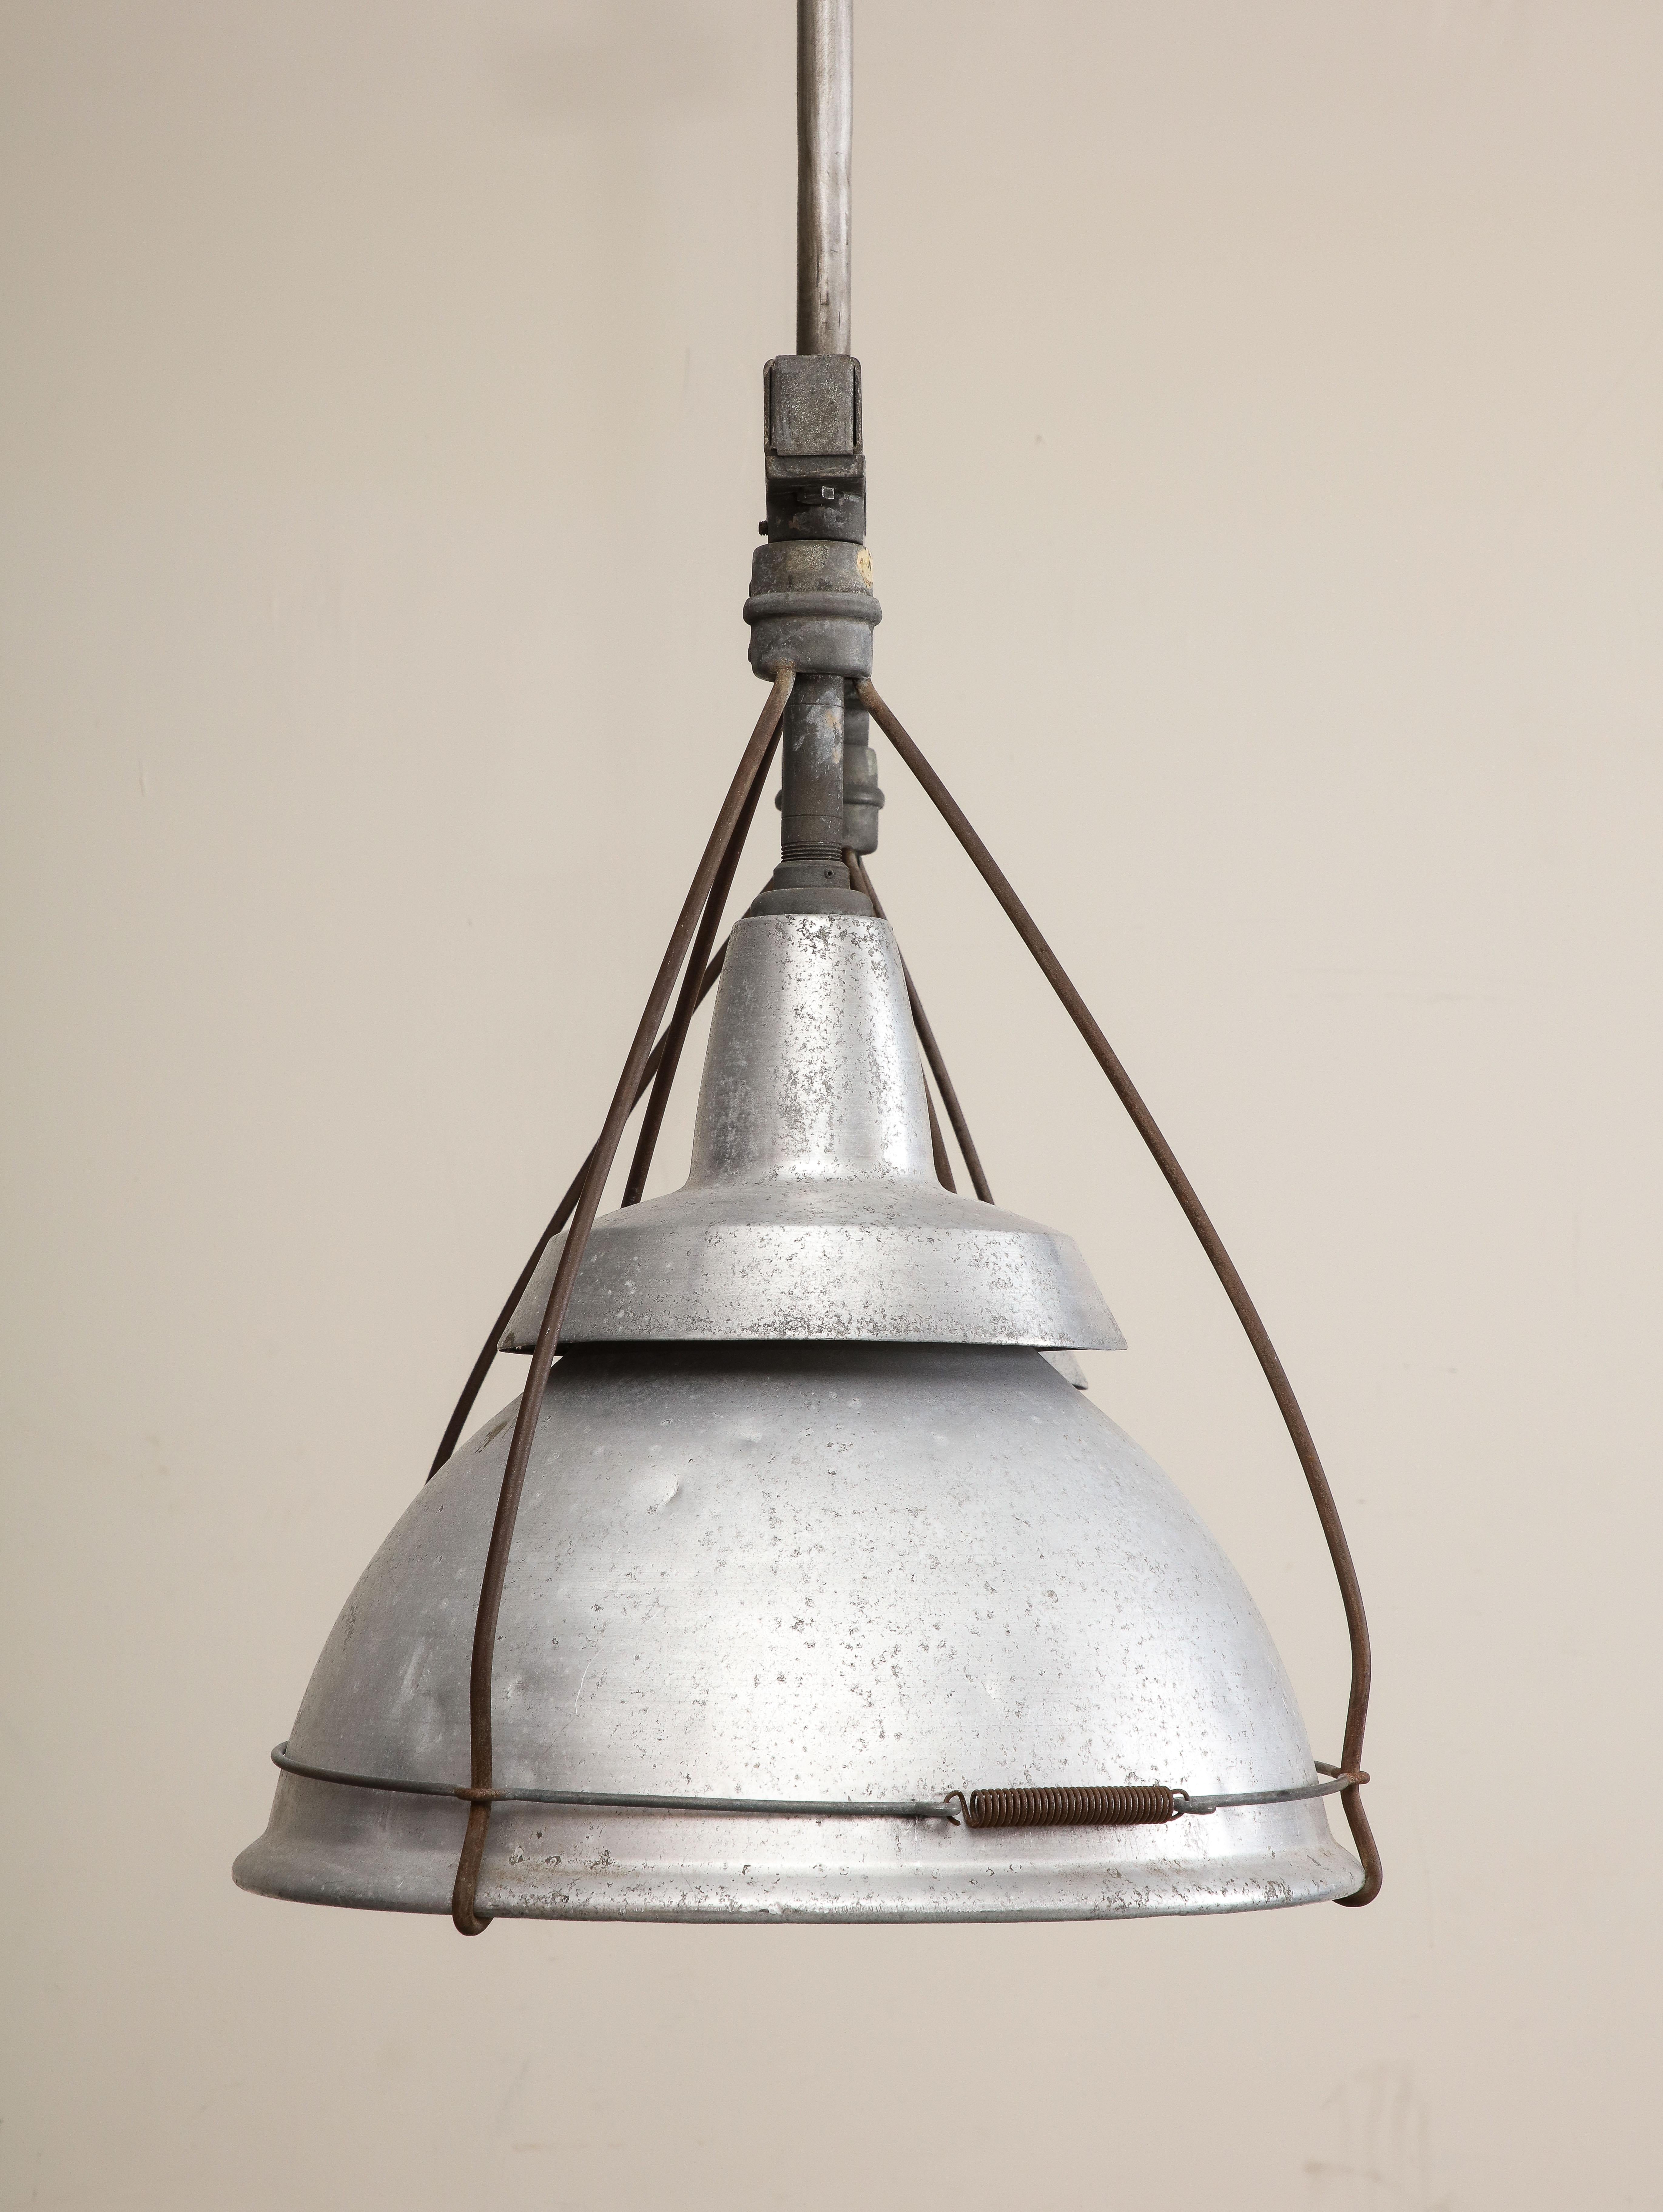 Large Ceiling-Mounted Industrial Double Pendant Light, C. 1920 For Sale 5